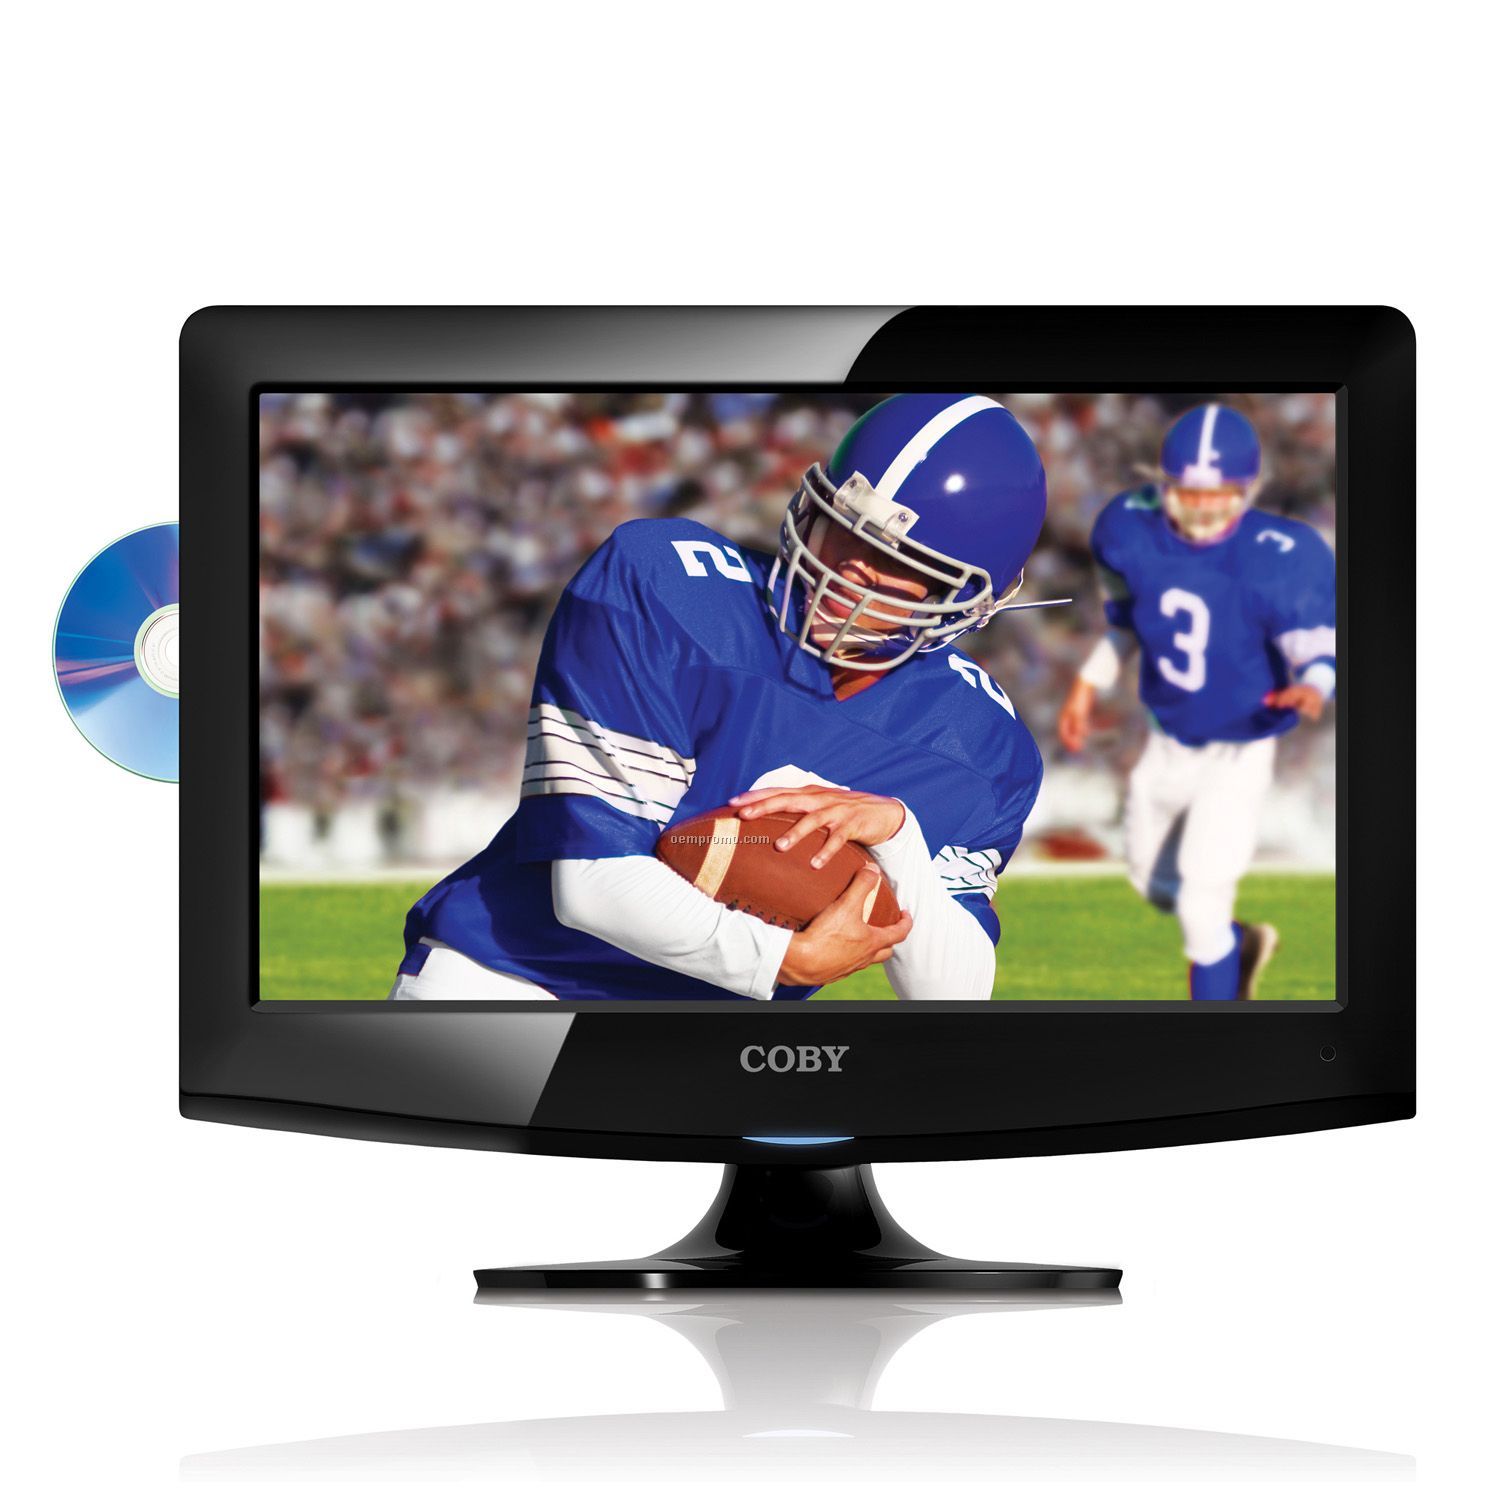 Coby 15-inch Widescreen Lcd/DVD Combo Hdtv